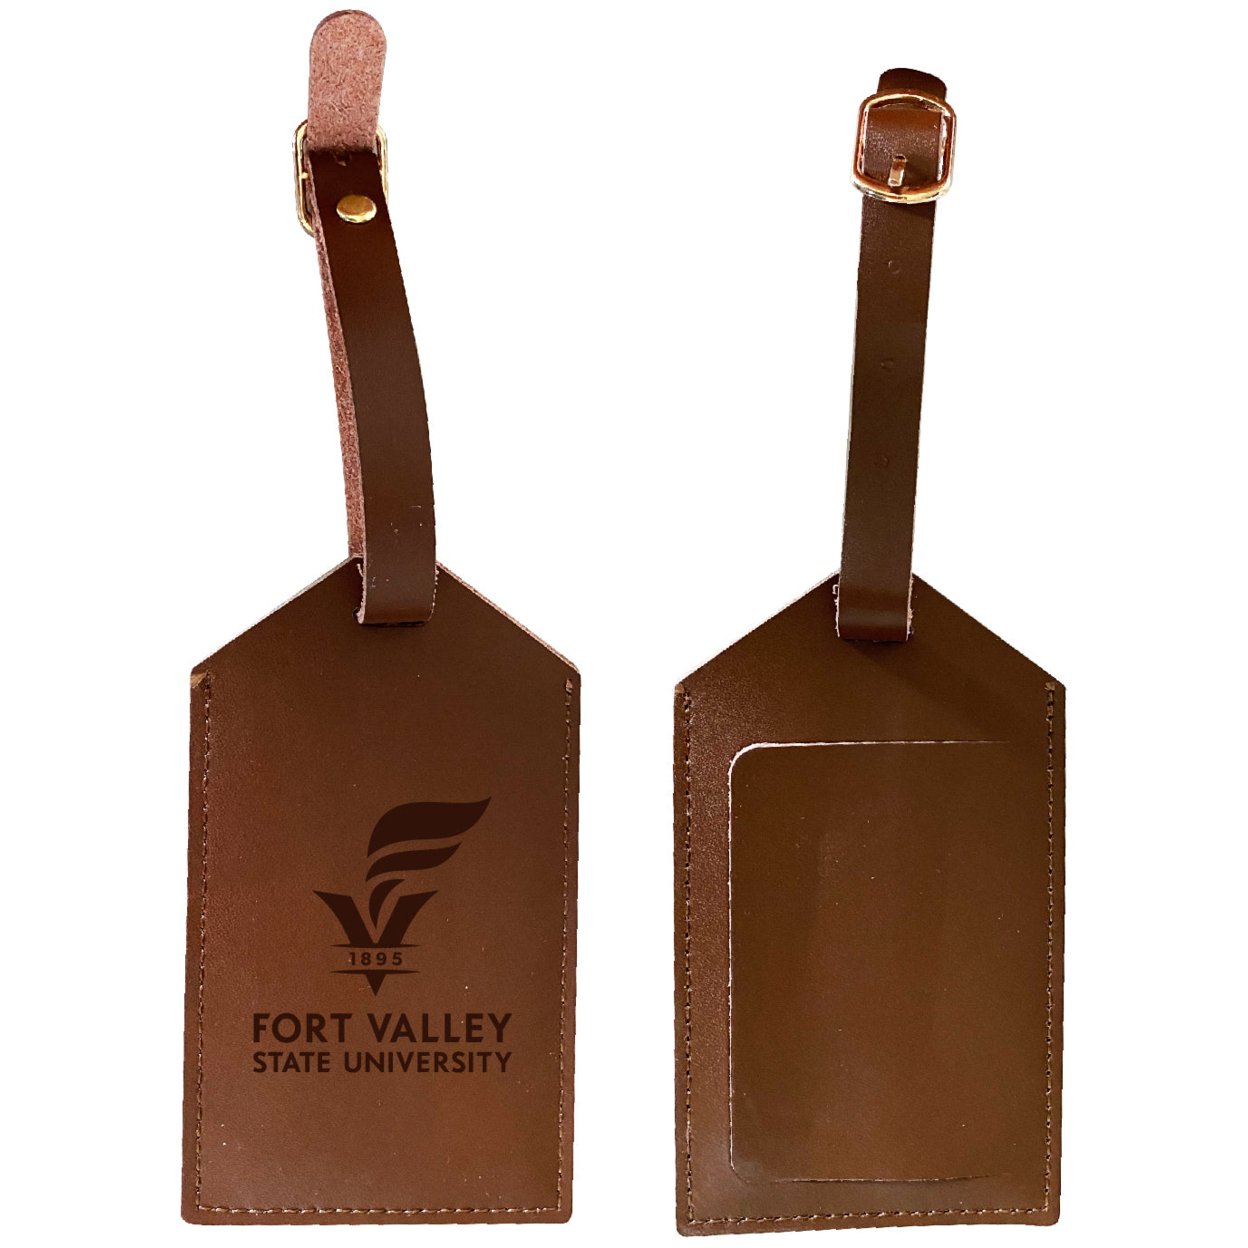 Fort Valley State University Leather Luggage Tag Engraved